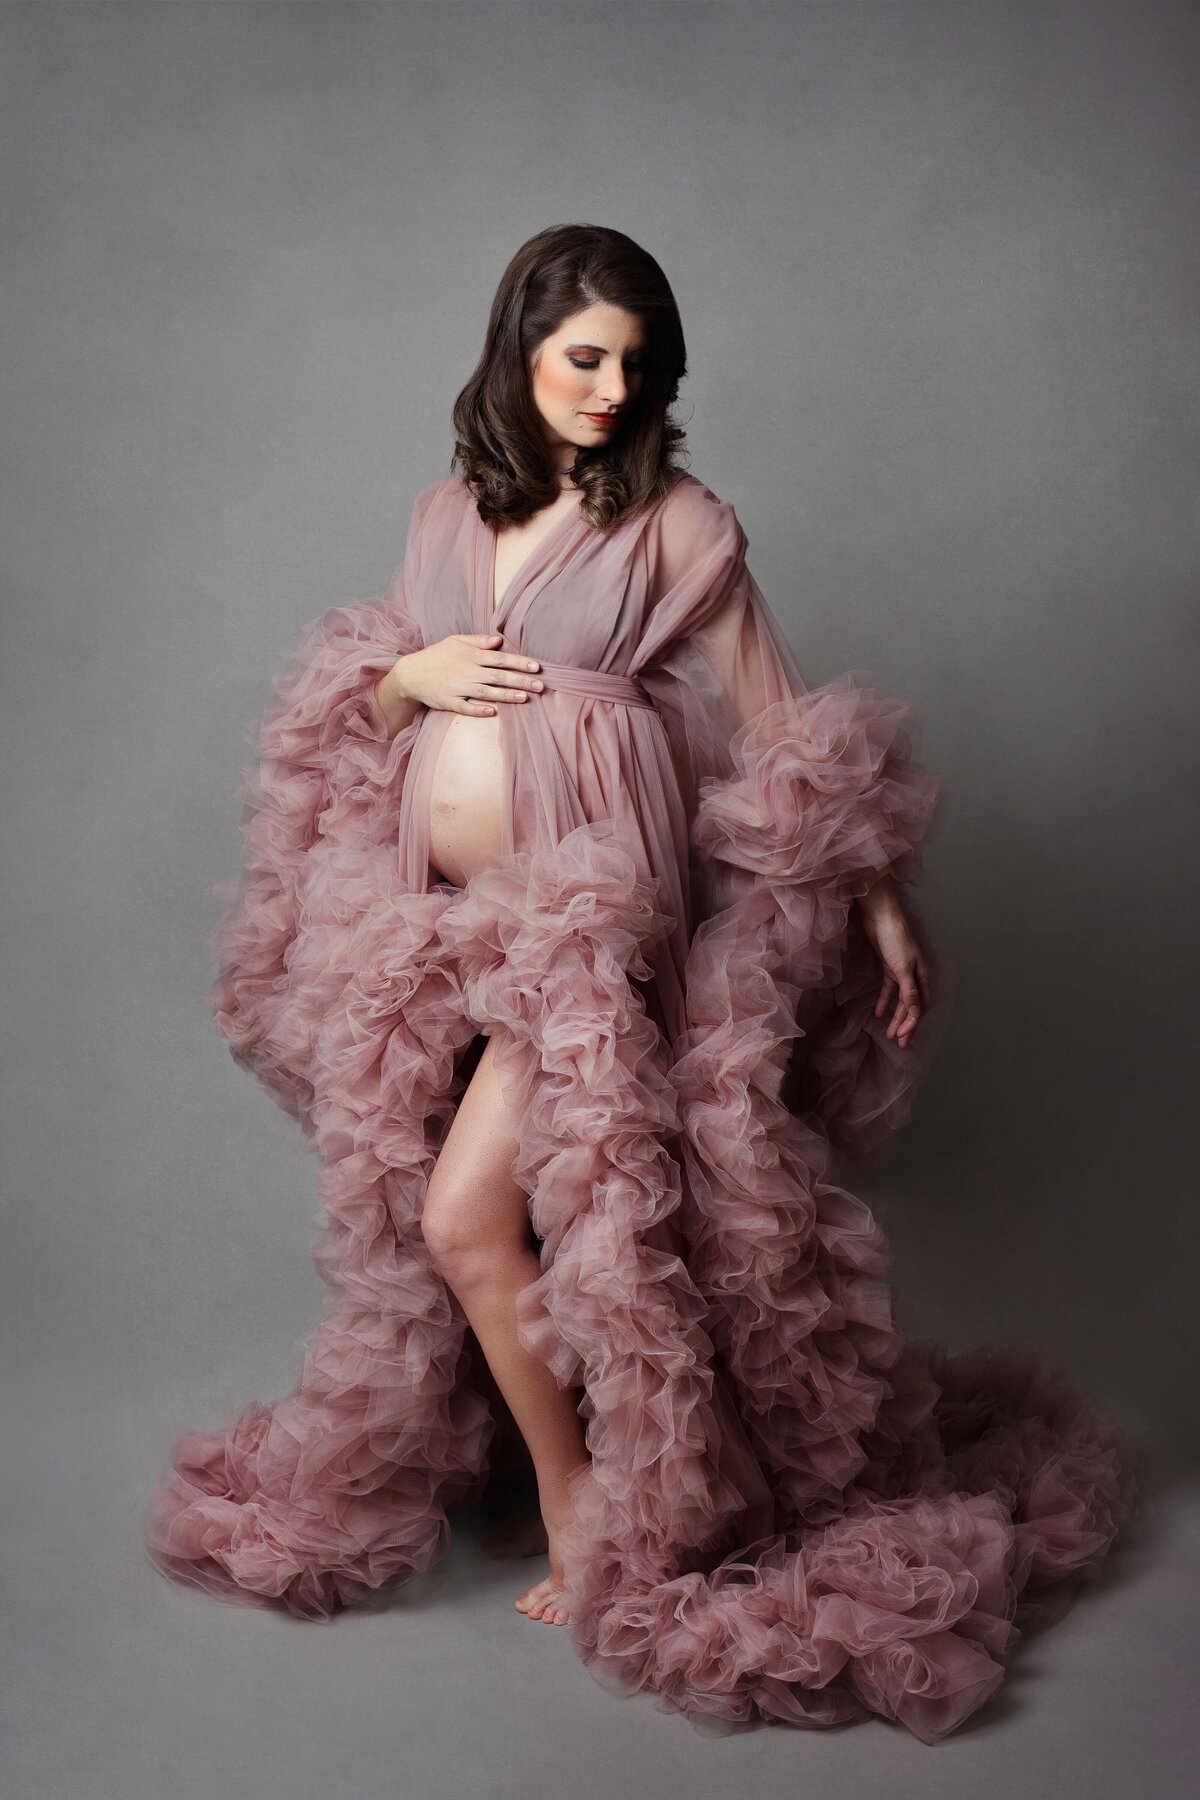 pregnant mother wearing a pink maternity gown/robe at her maternity photo shoot at a maternity photography studio